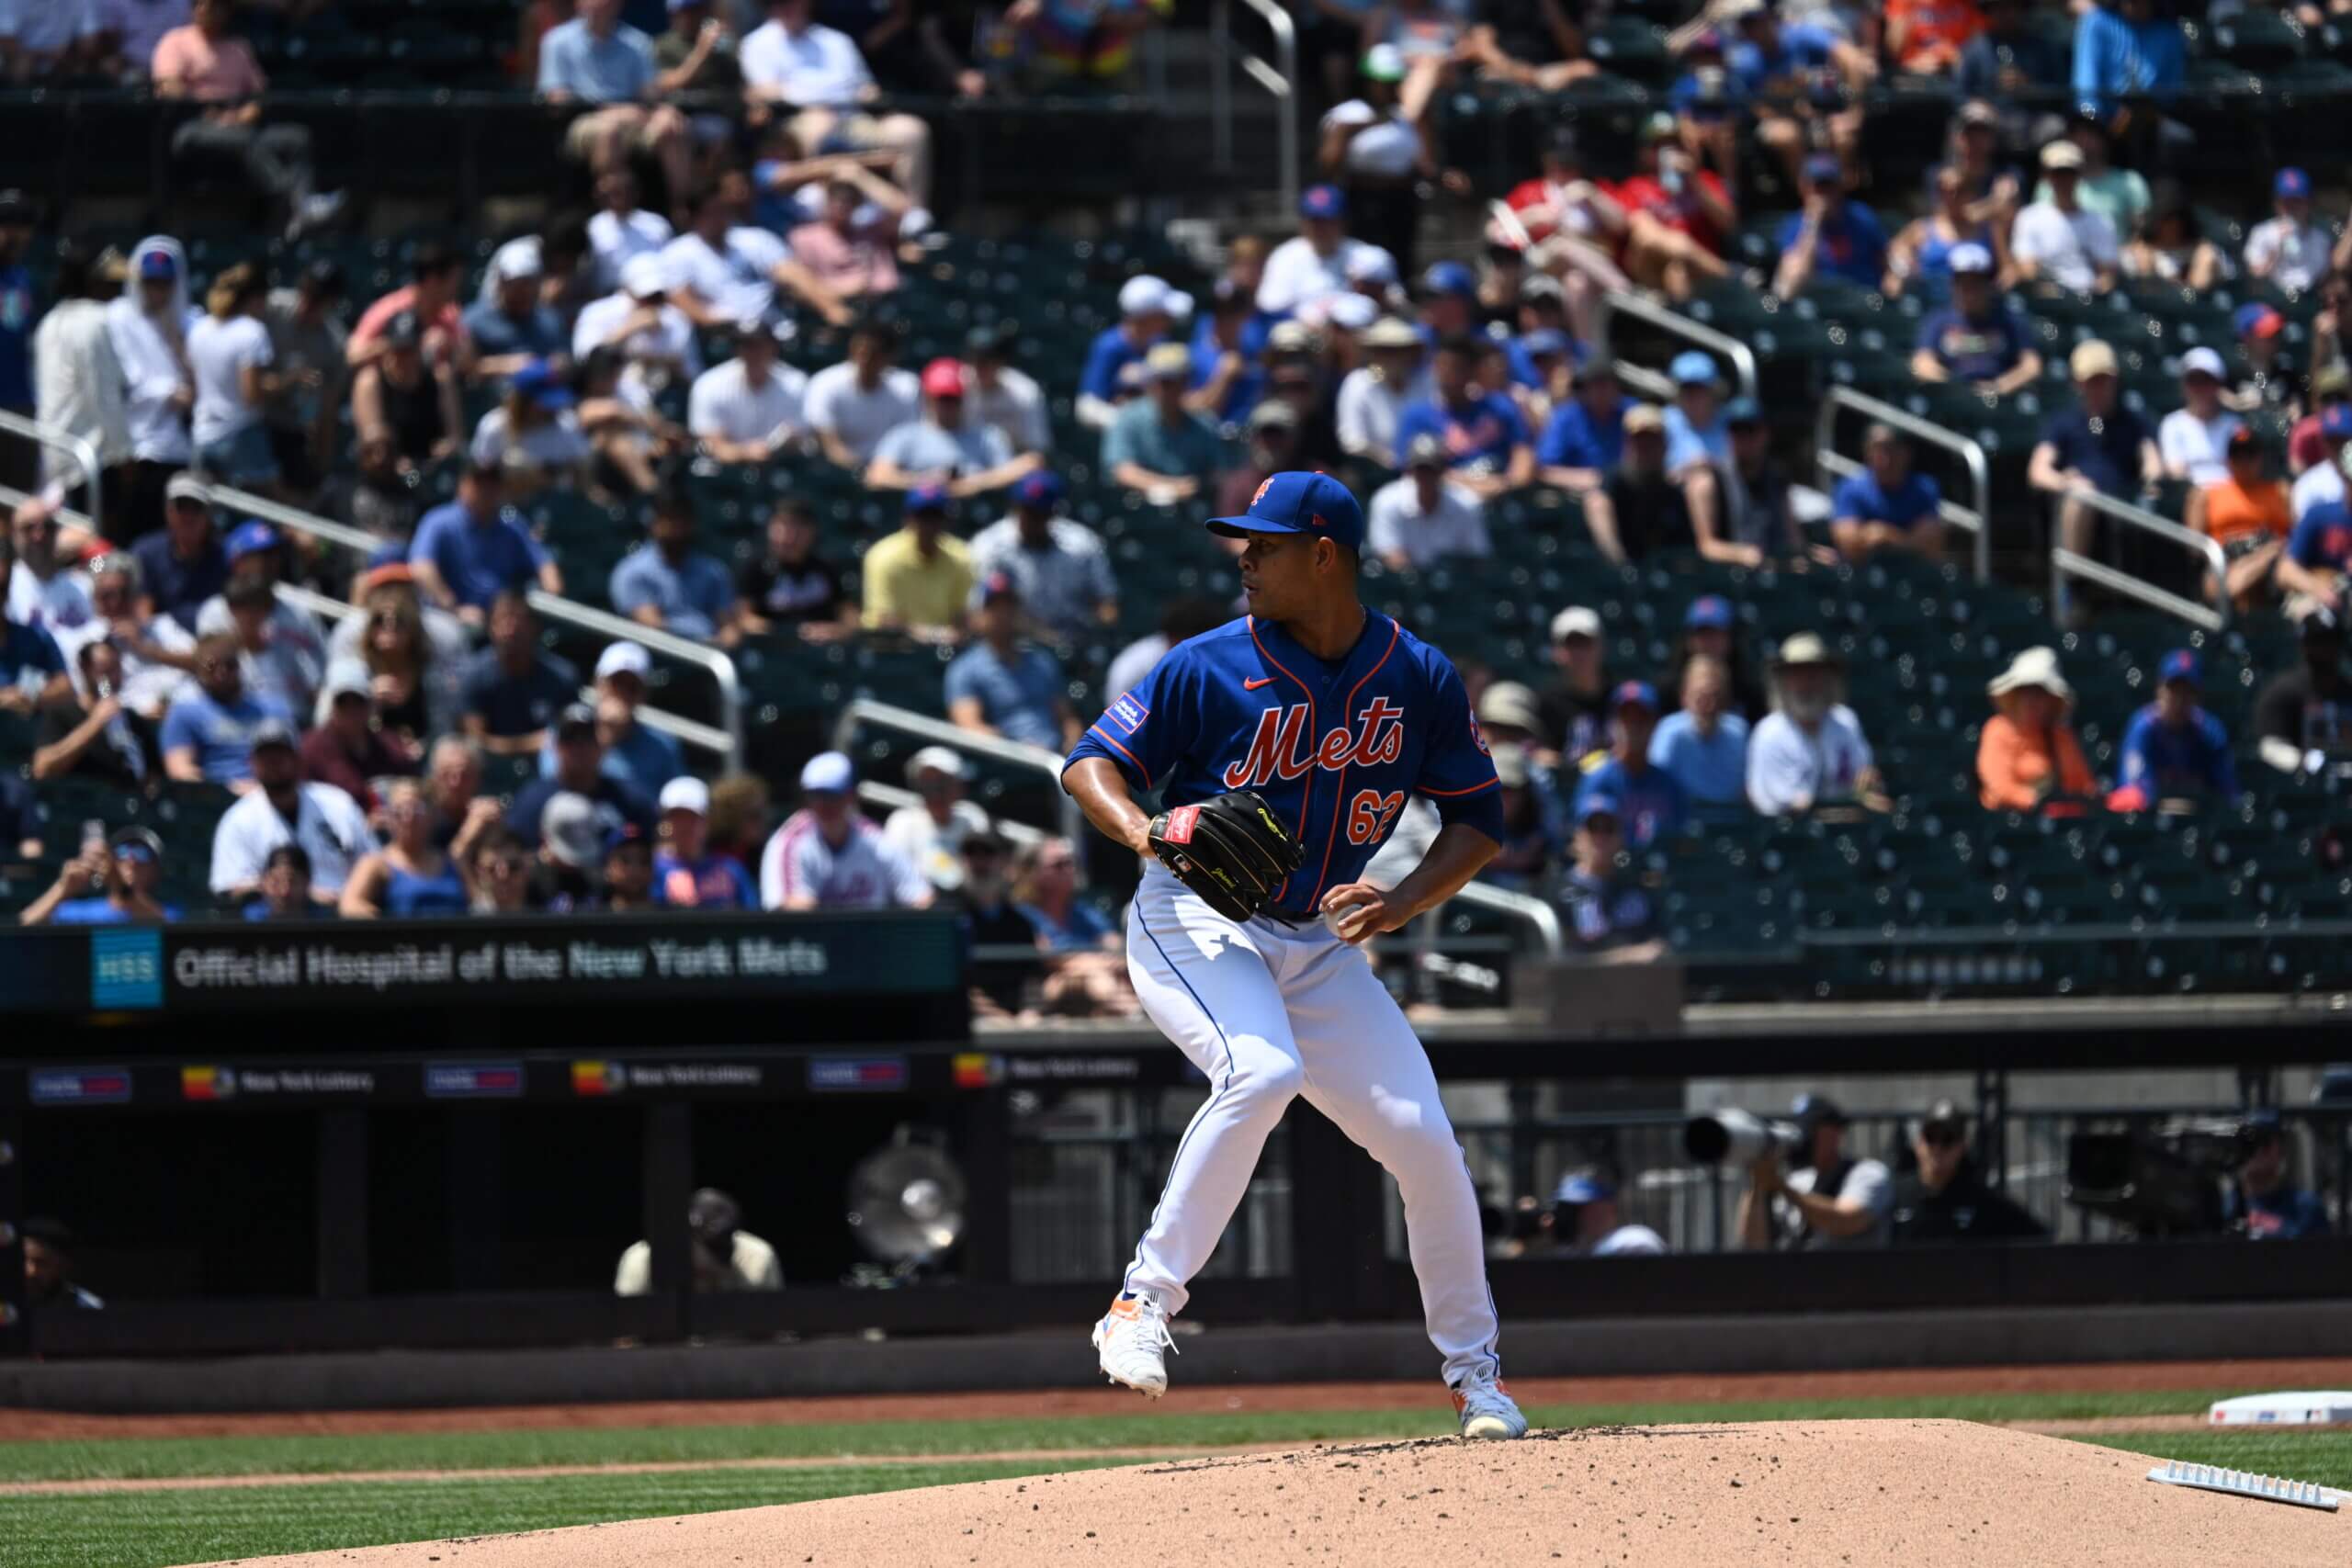 Jose Quintana felt 'great' after long road to Mets debut